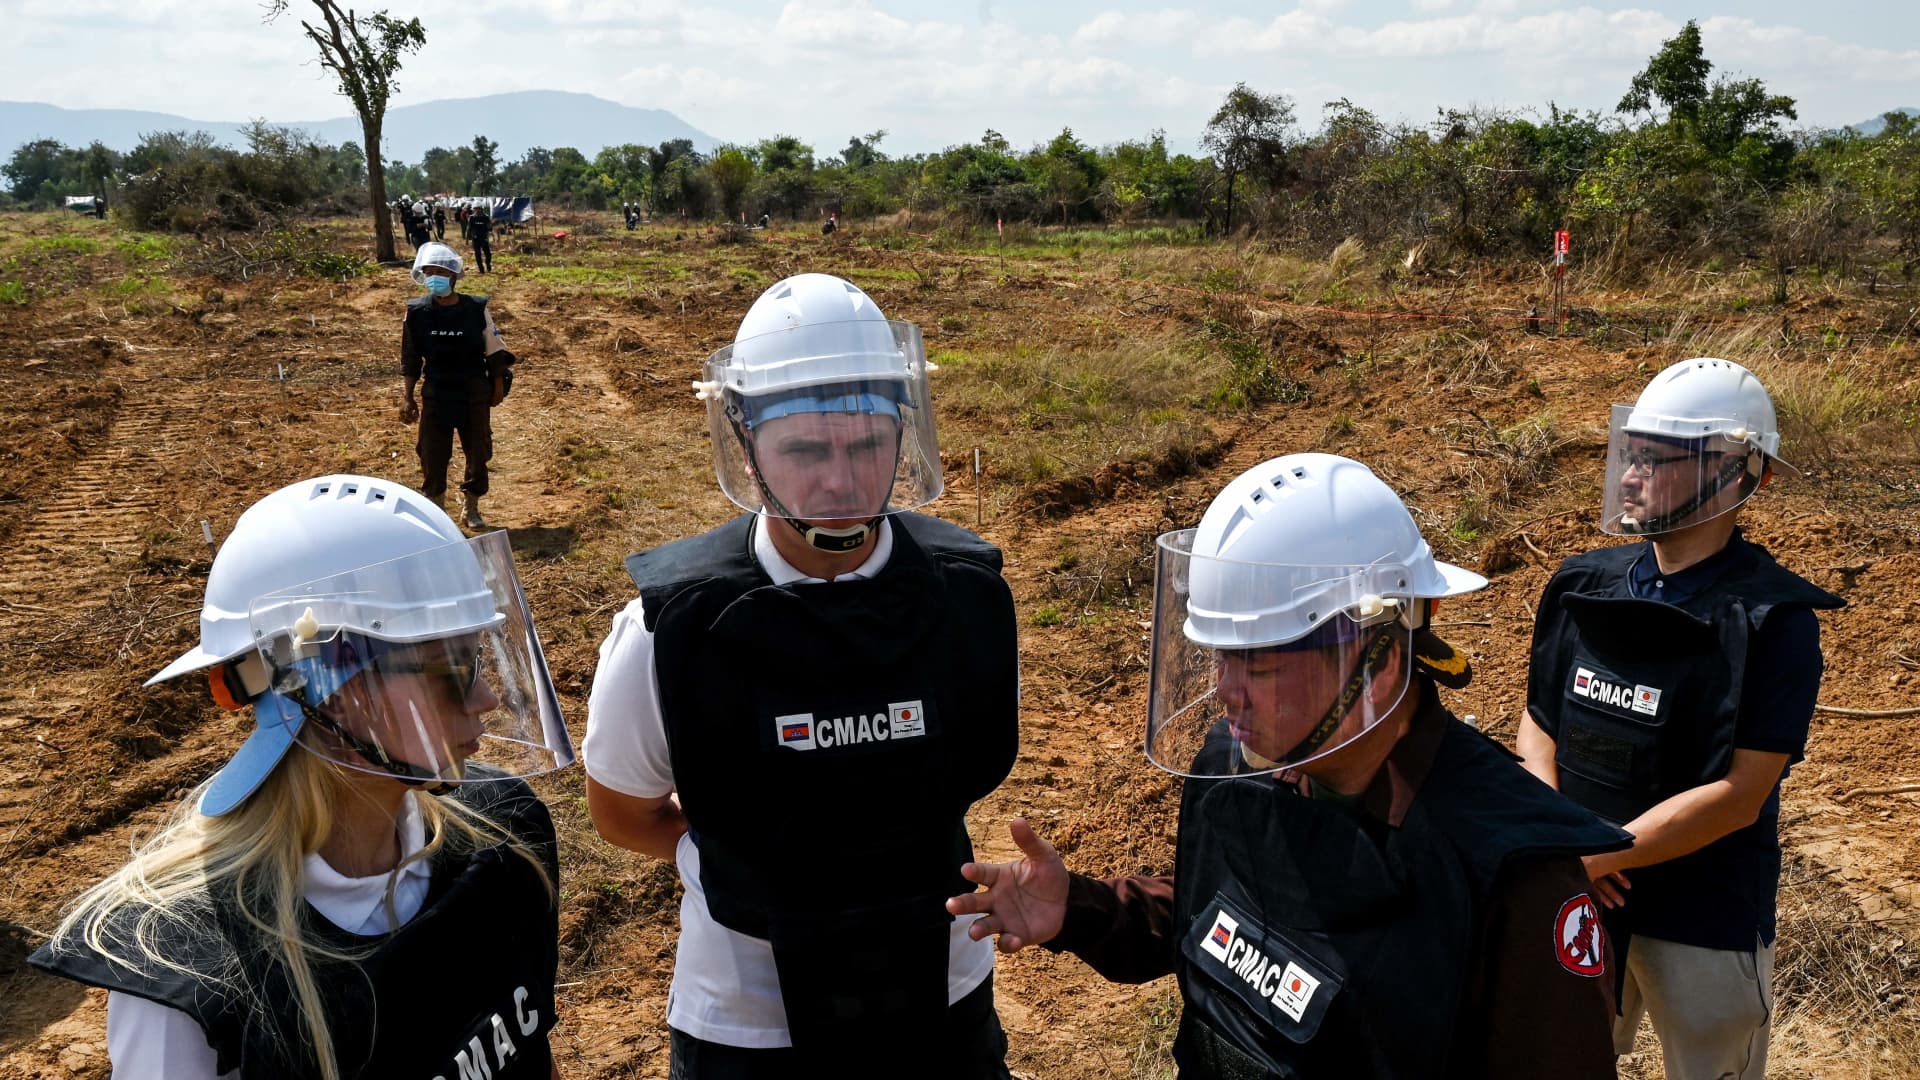 Ukraine deminers (L) listen to a Cambodian deminer (2R) at a mine field during a technical training session on demining technologies in Battambang province on January 19, 2023. 